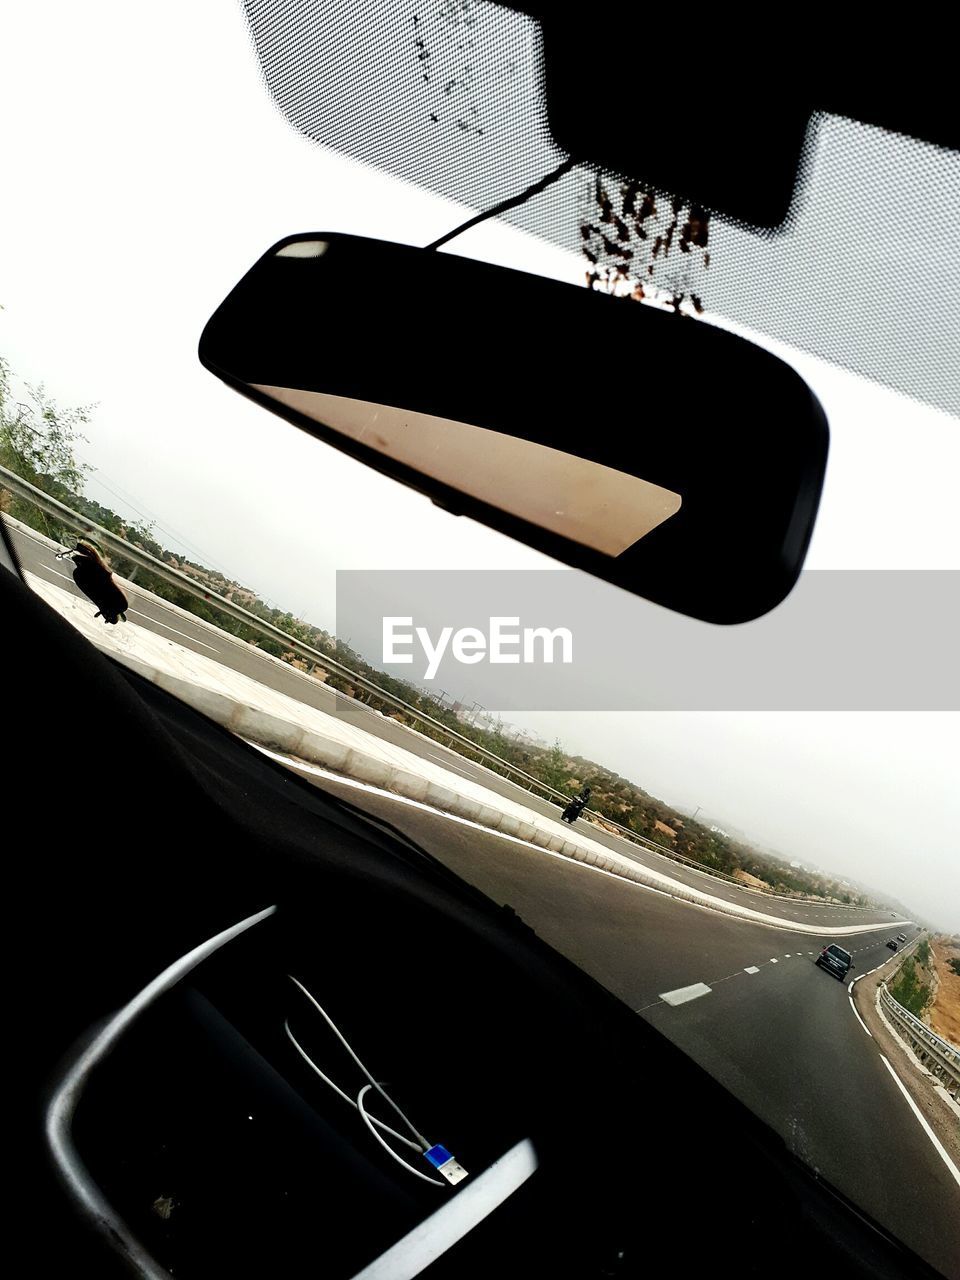 CLOSE-UP OF CAR WINDSHIELD WITH WINDOW